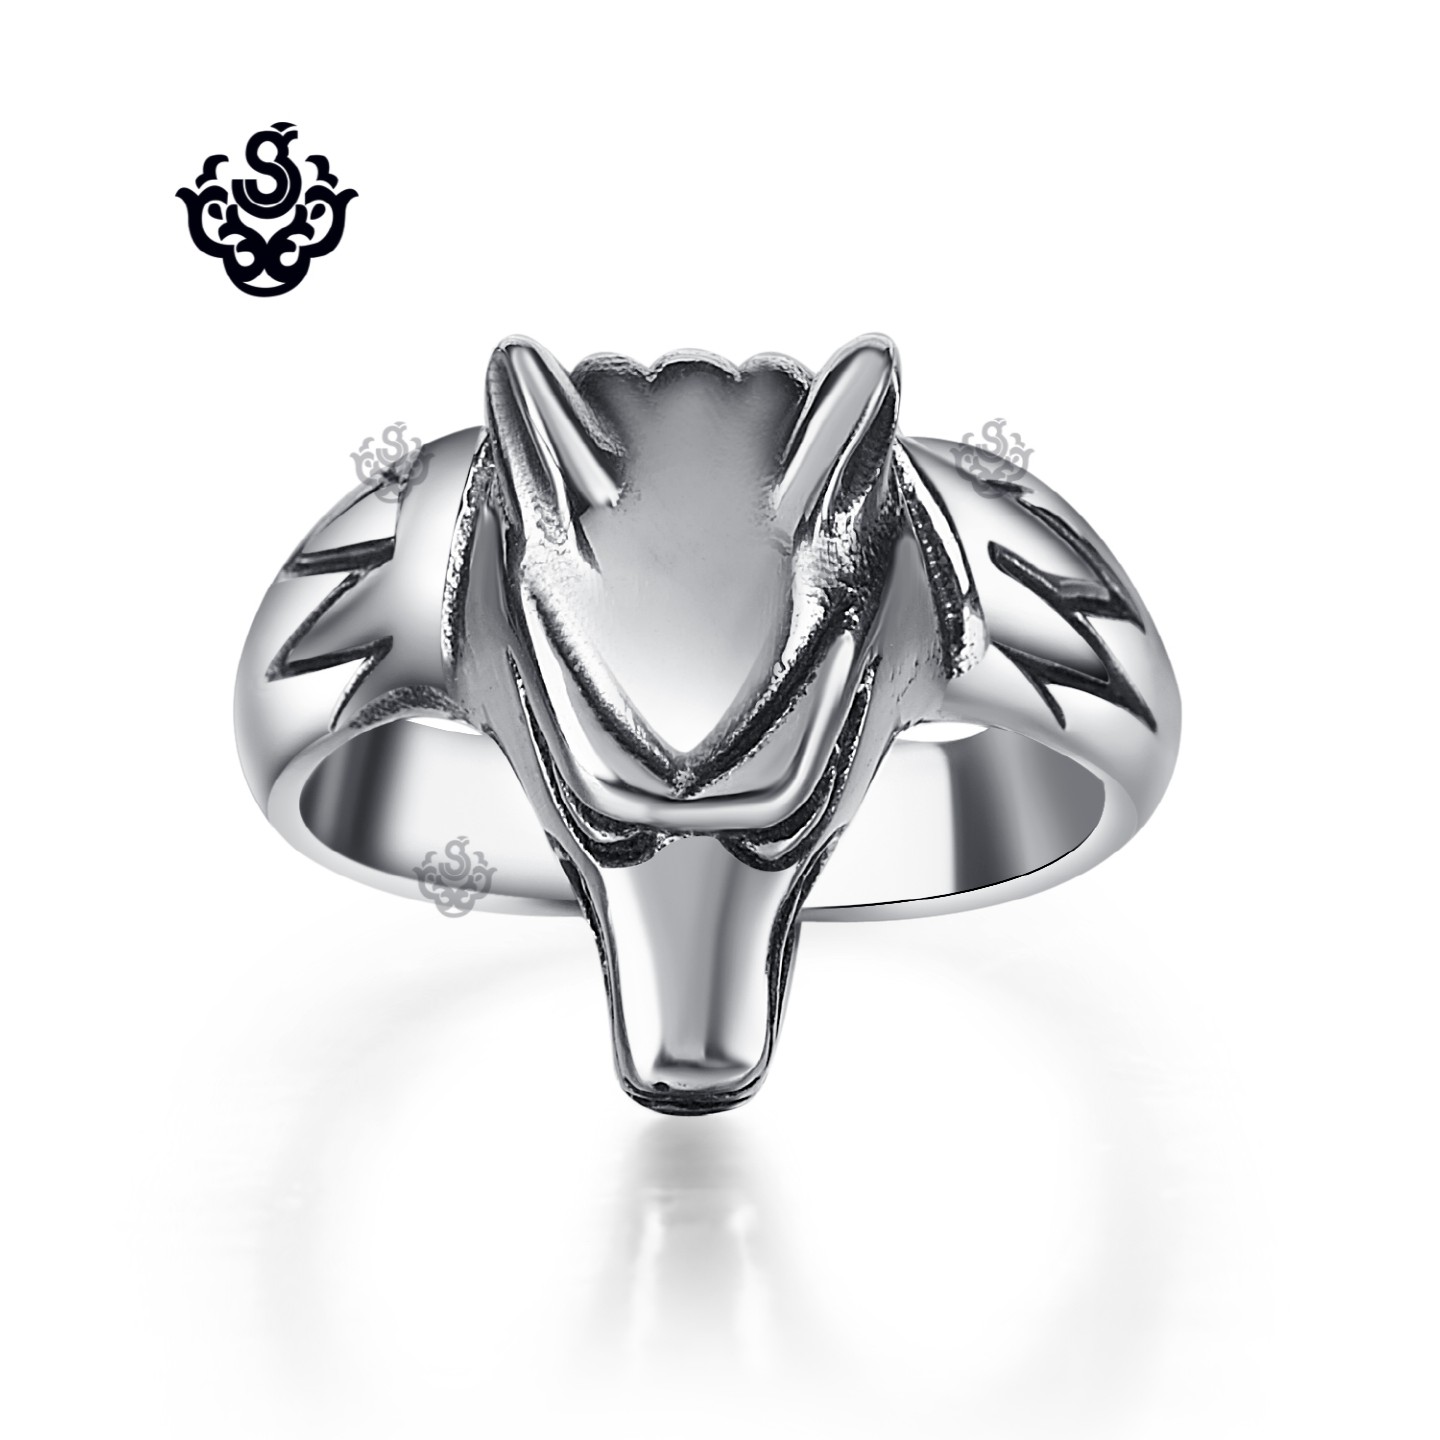 Silver wolf head solid ring stainless steel band soft gothic fashion